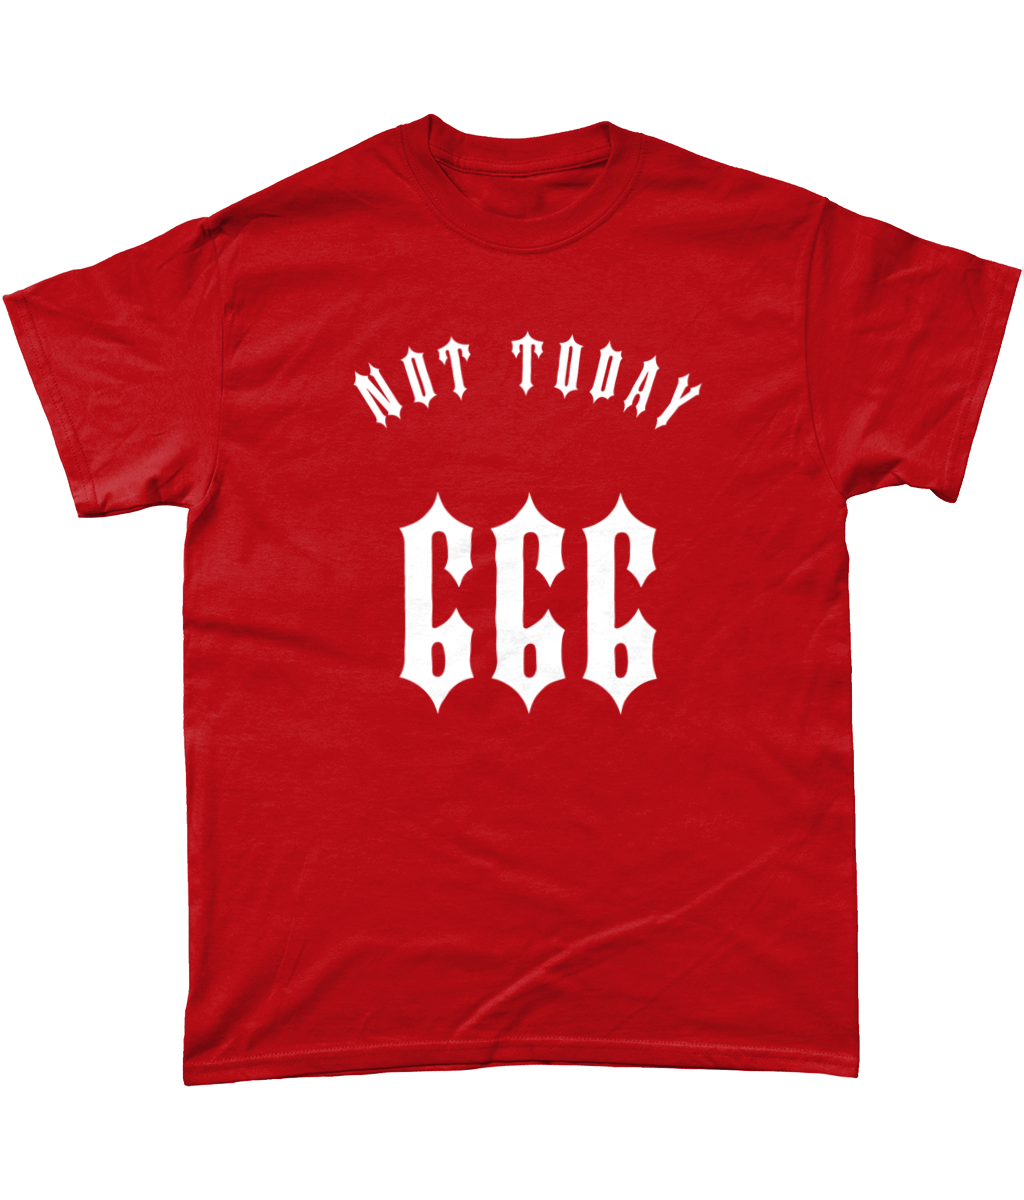 Not Today 666 - T-Shirt